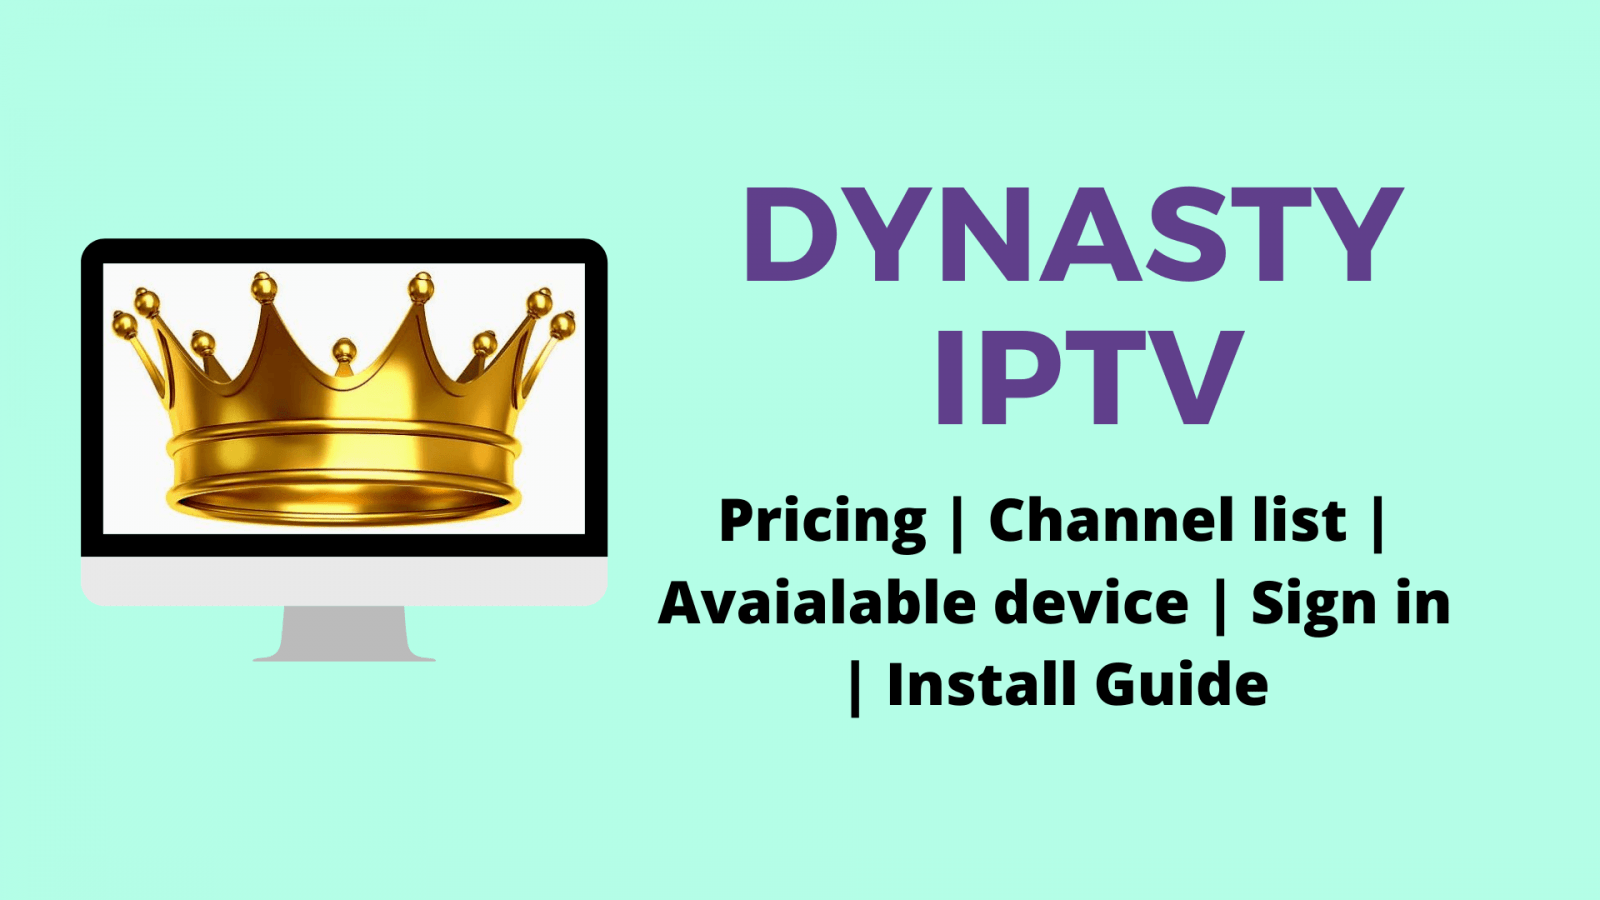 Dynasty IPTV: Price, Channel List, and Setup Guide